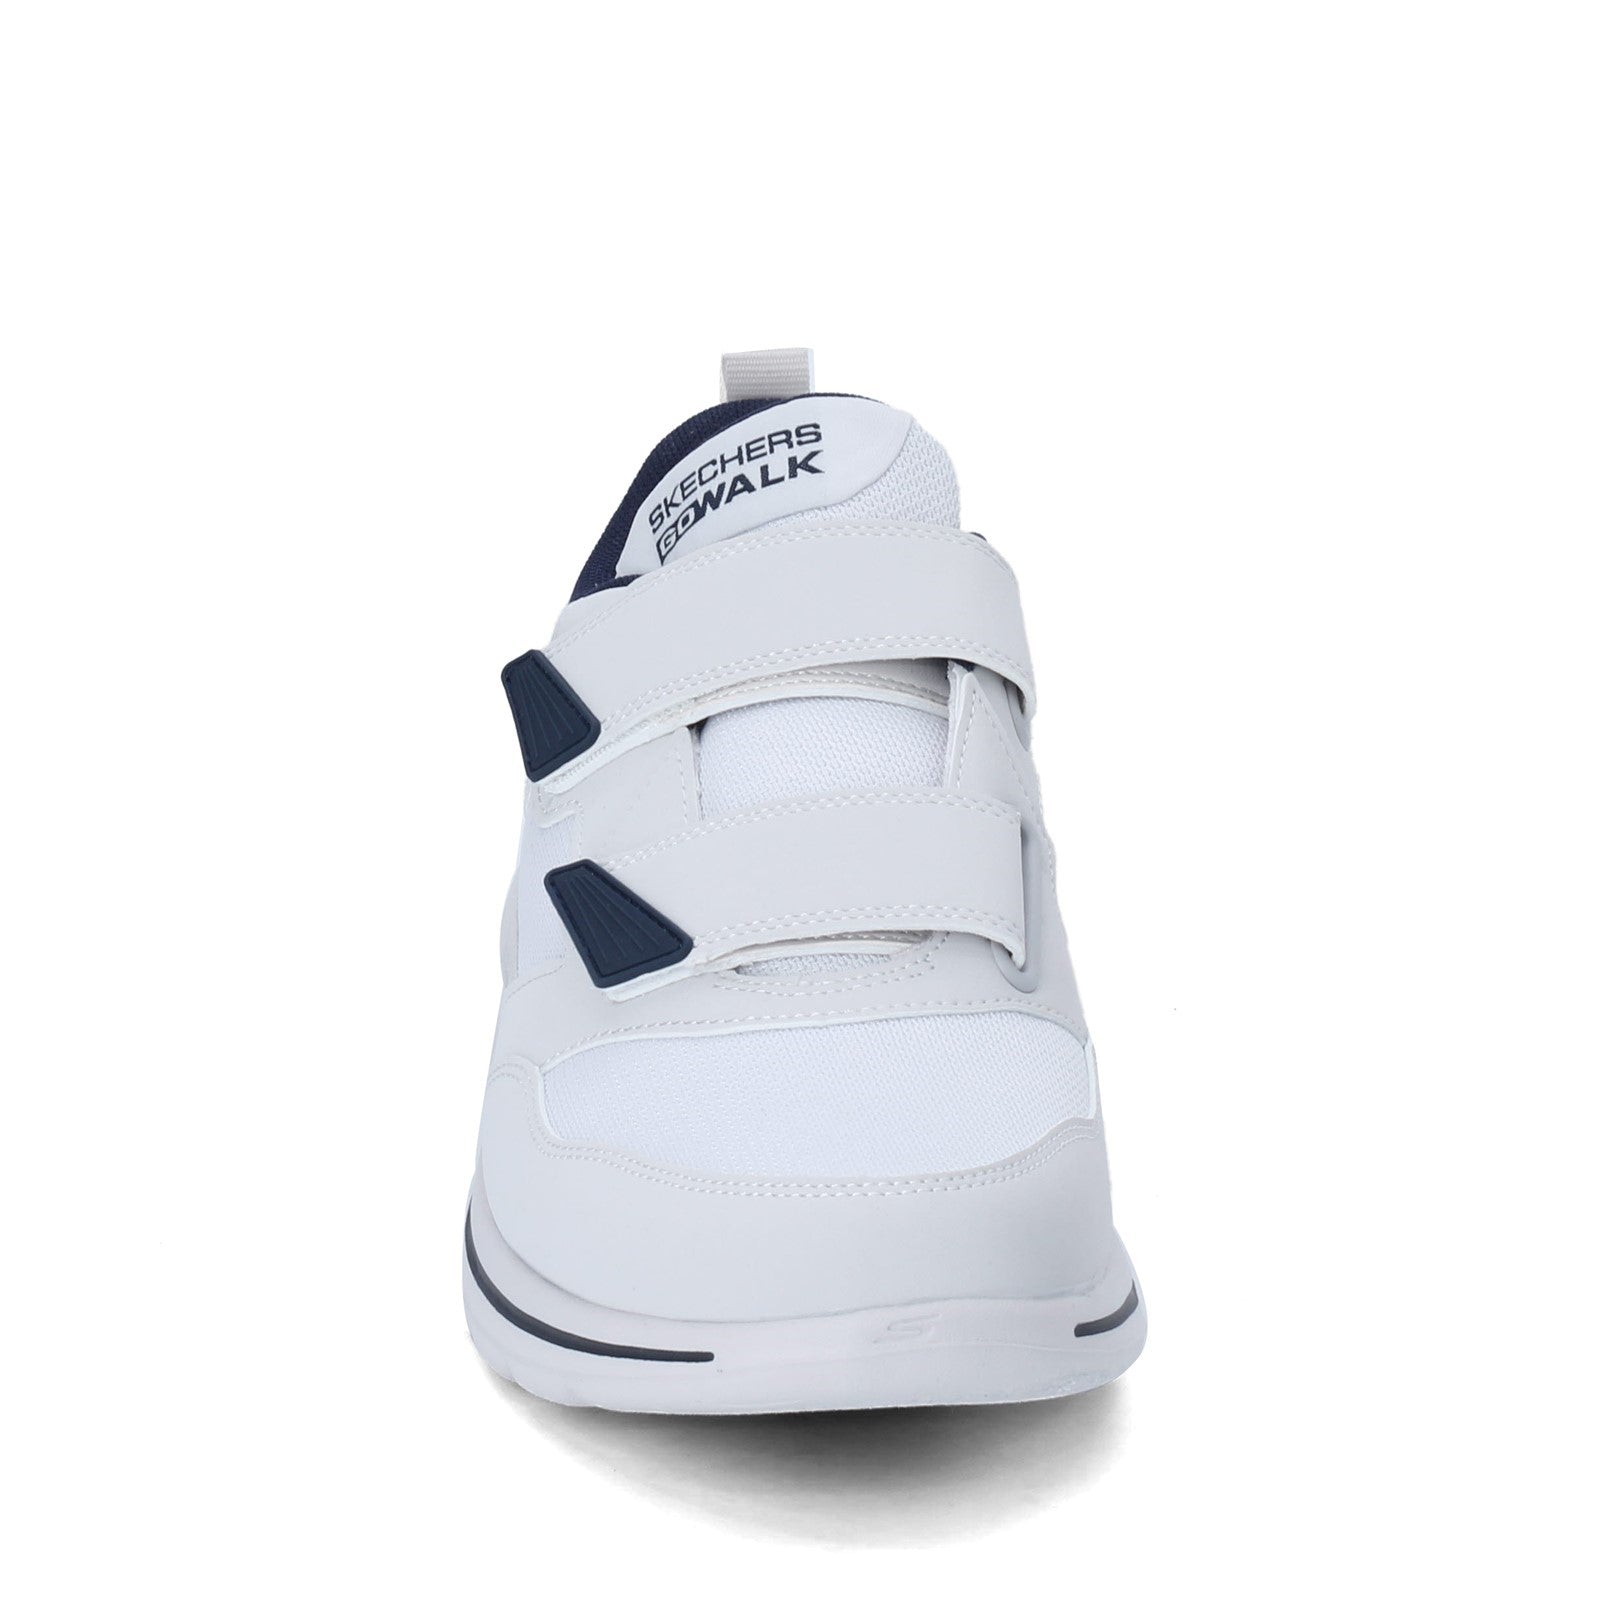 Discover more than 201 skechers white sneakers mens